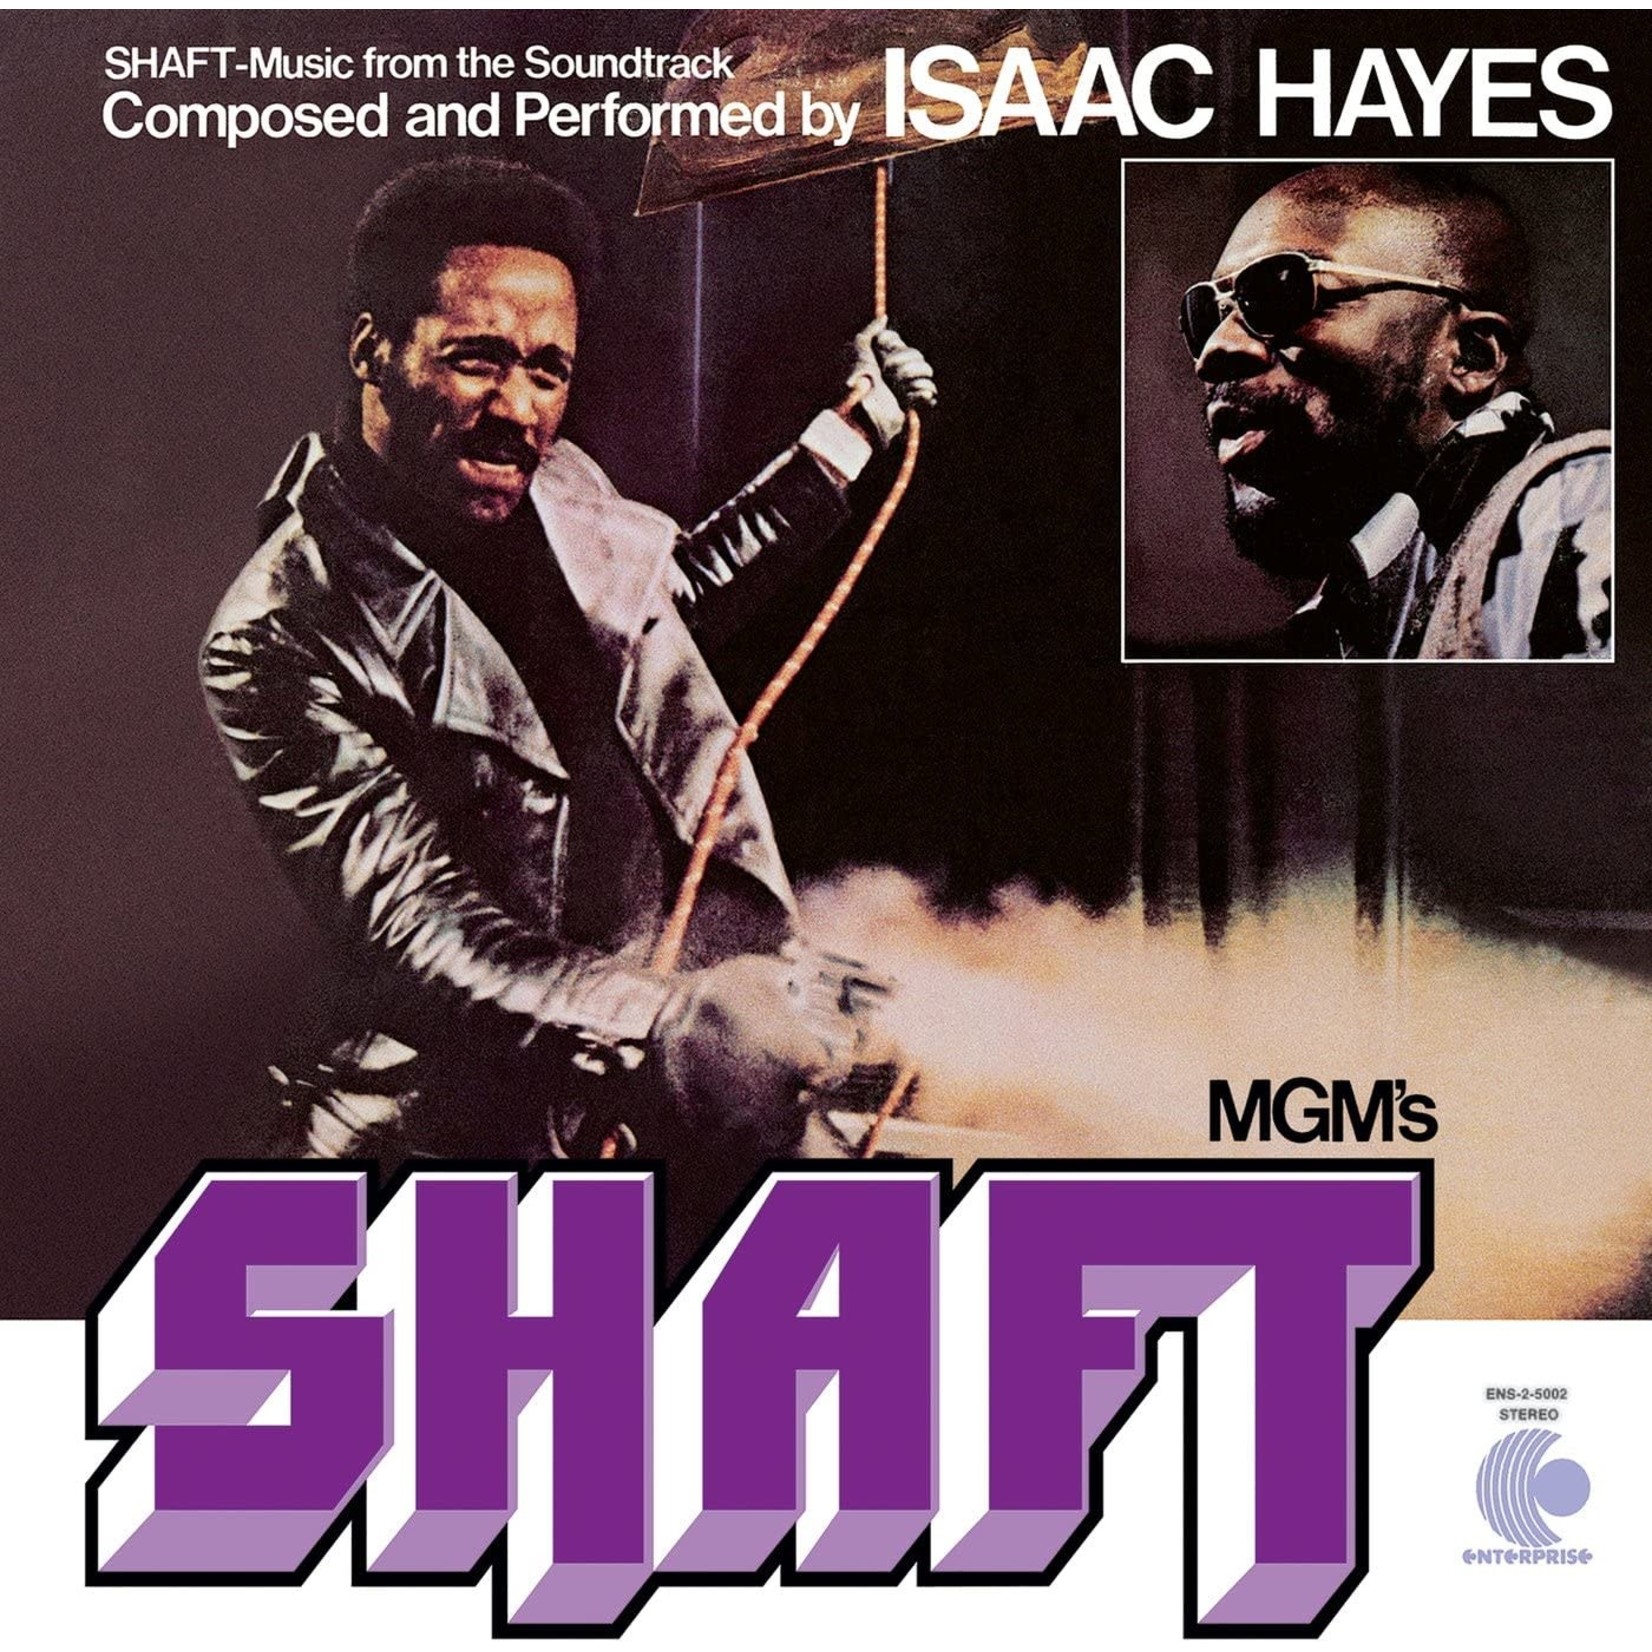 [New] Hayes, Isaac: Shaft Music From the Soundtrack [CONCORD JAZZ]